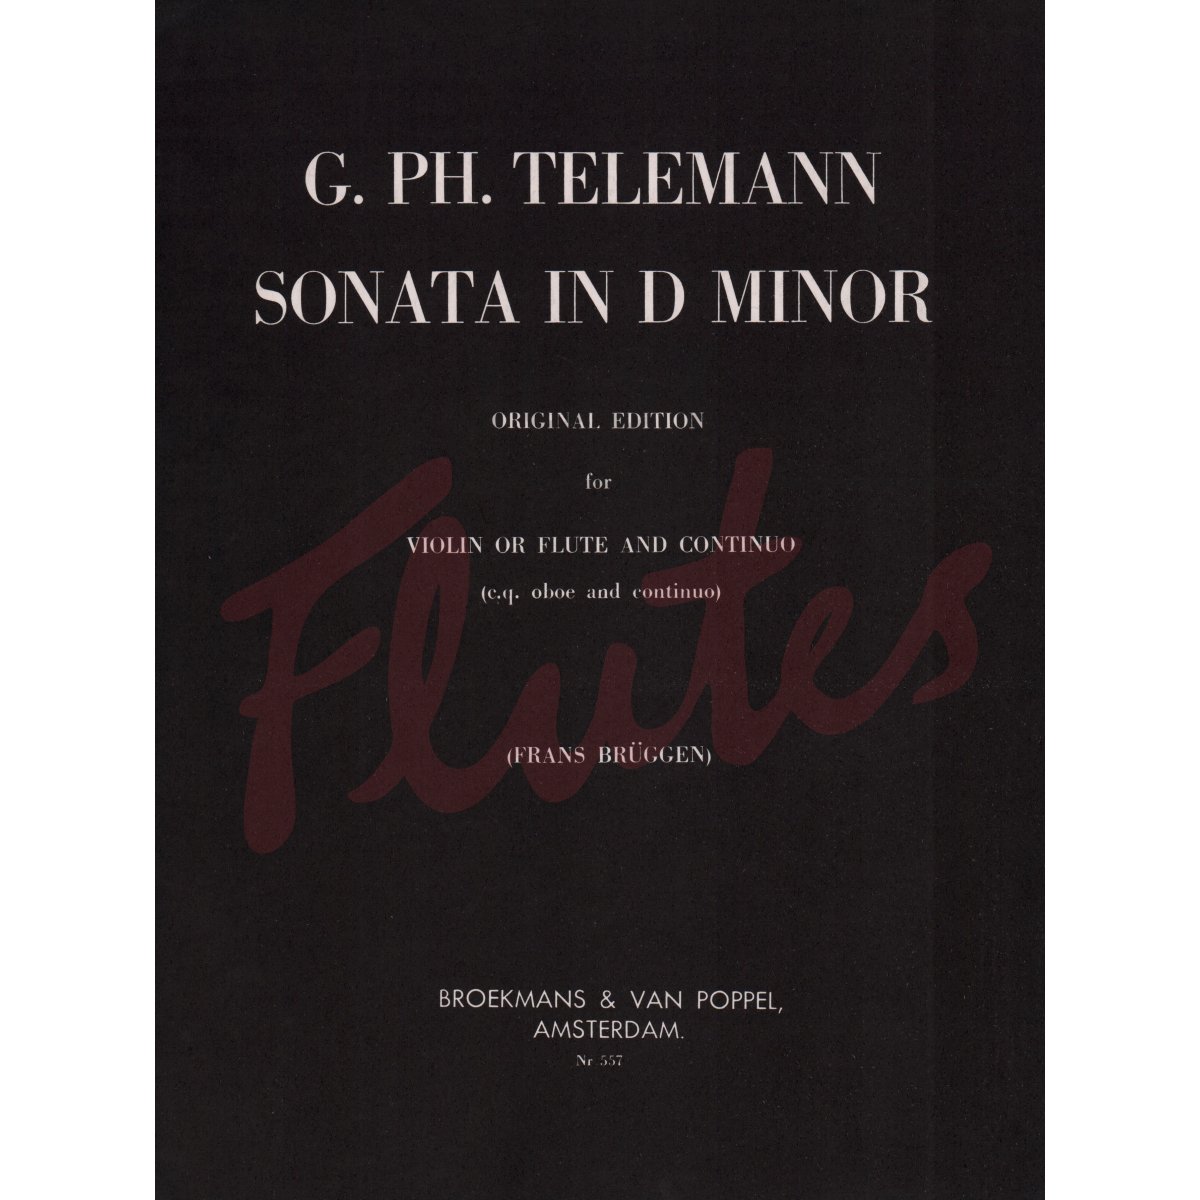 Sonata in D minor for Flute and Continuo